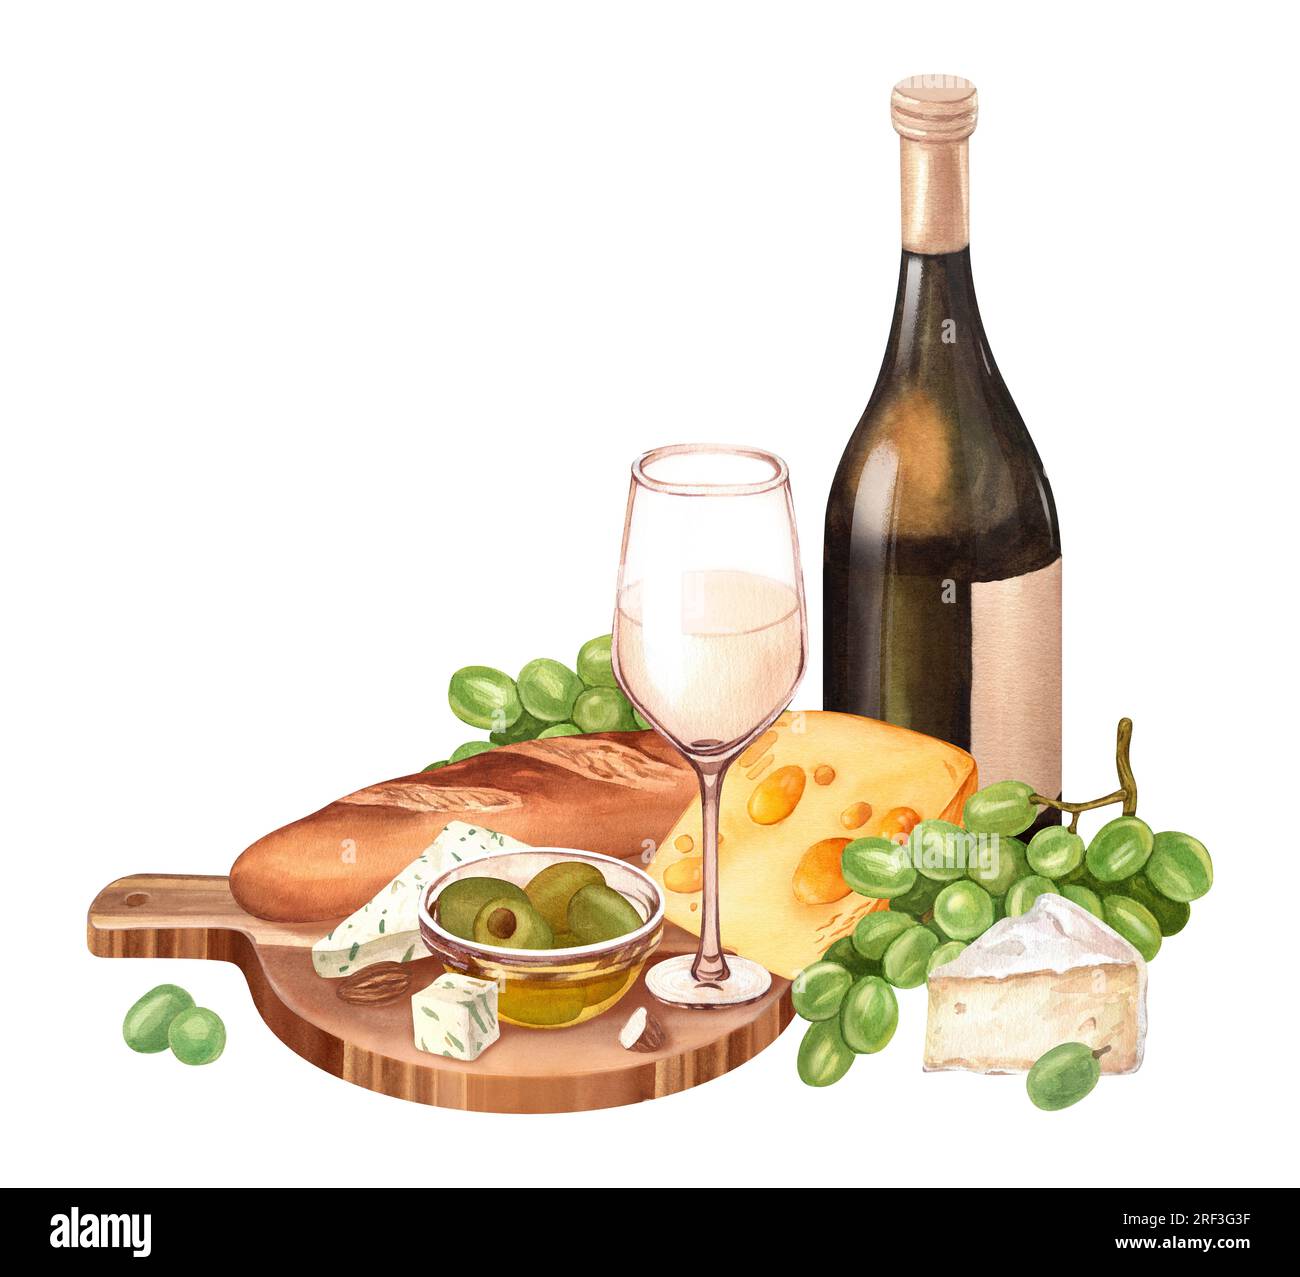 Watercolor white wine bottle, fresh ripe green grapes, cheese on the ...